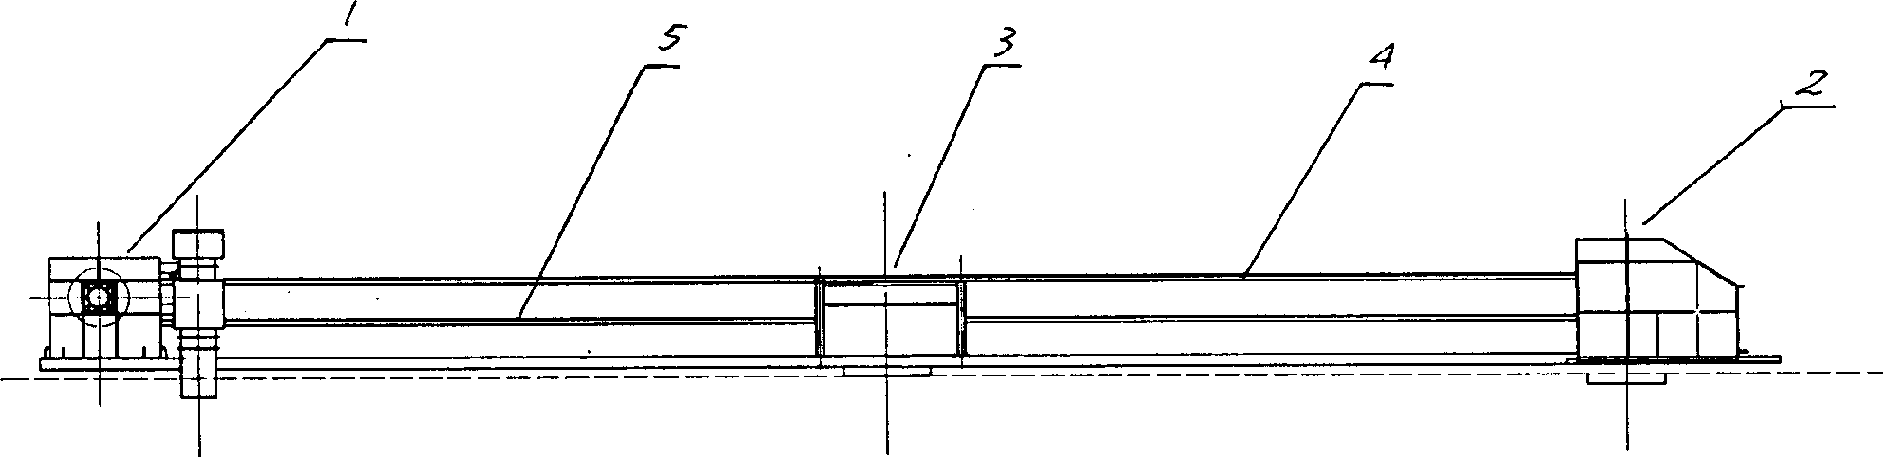 Disk-type conveyer with multiple feeding and discharging points